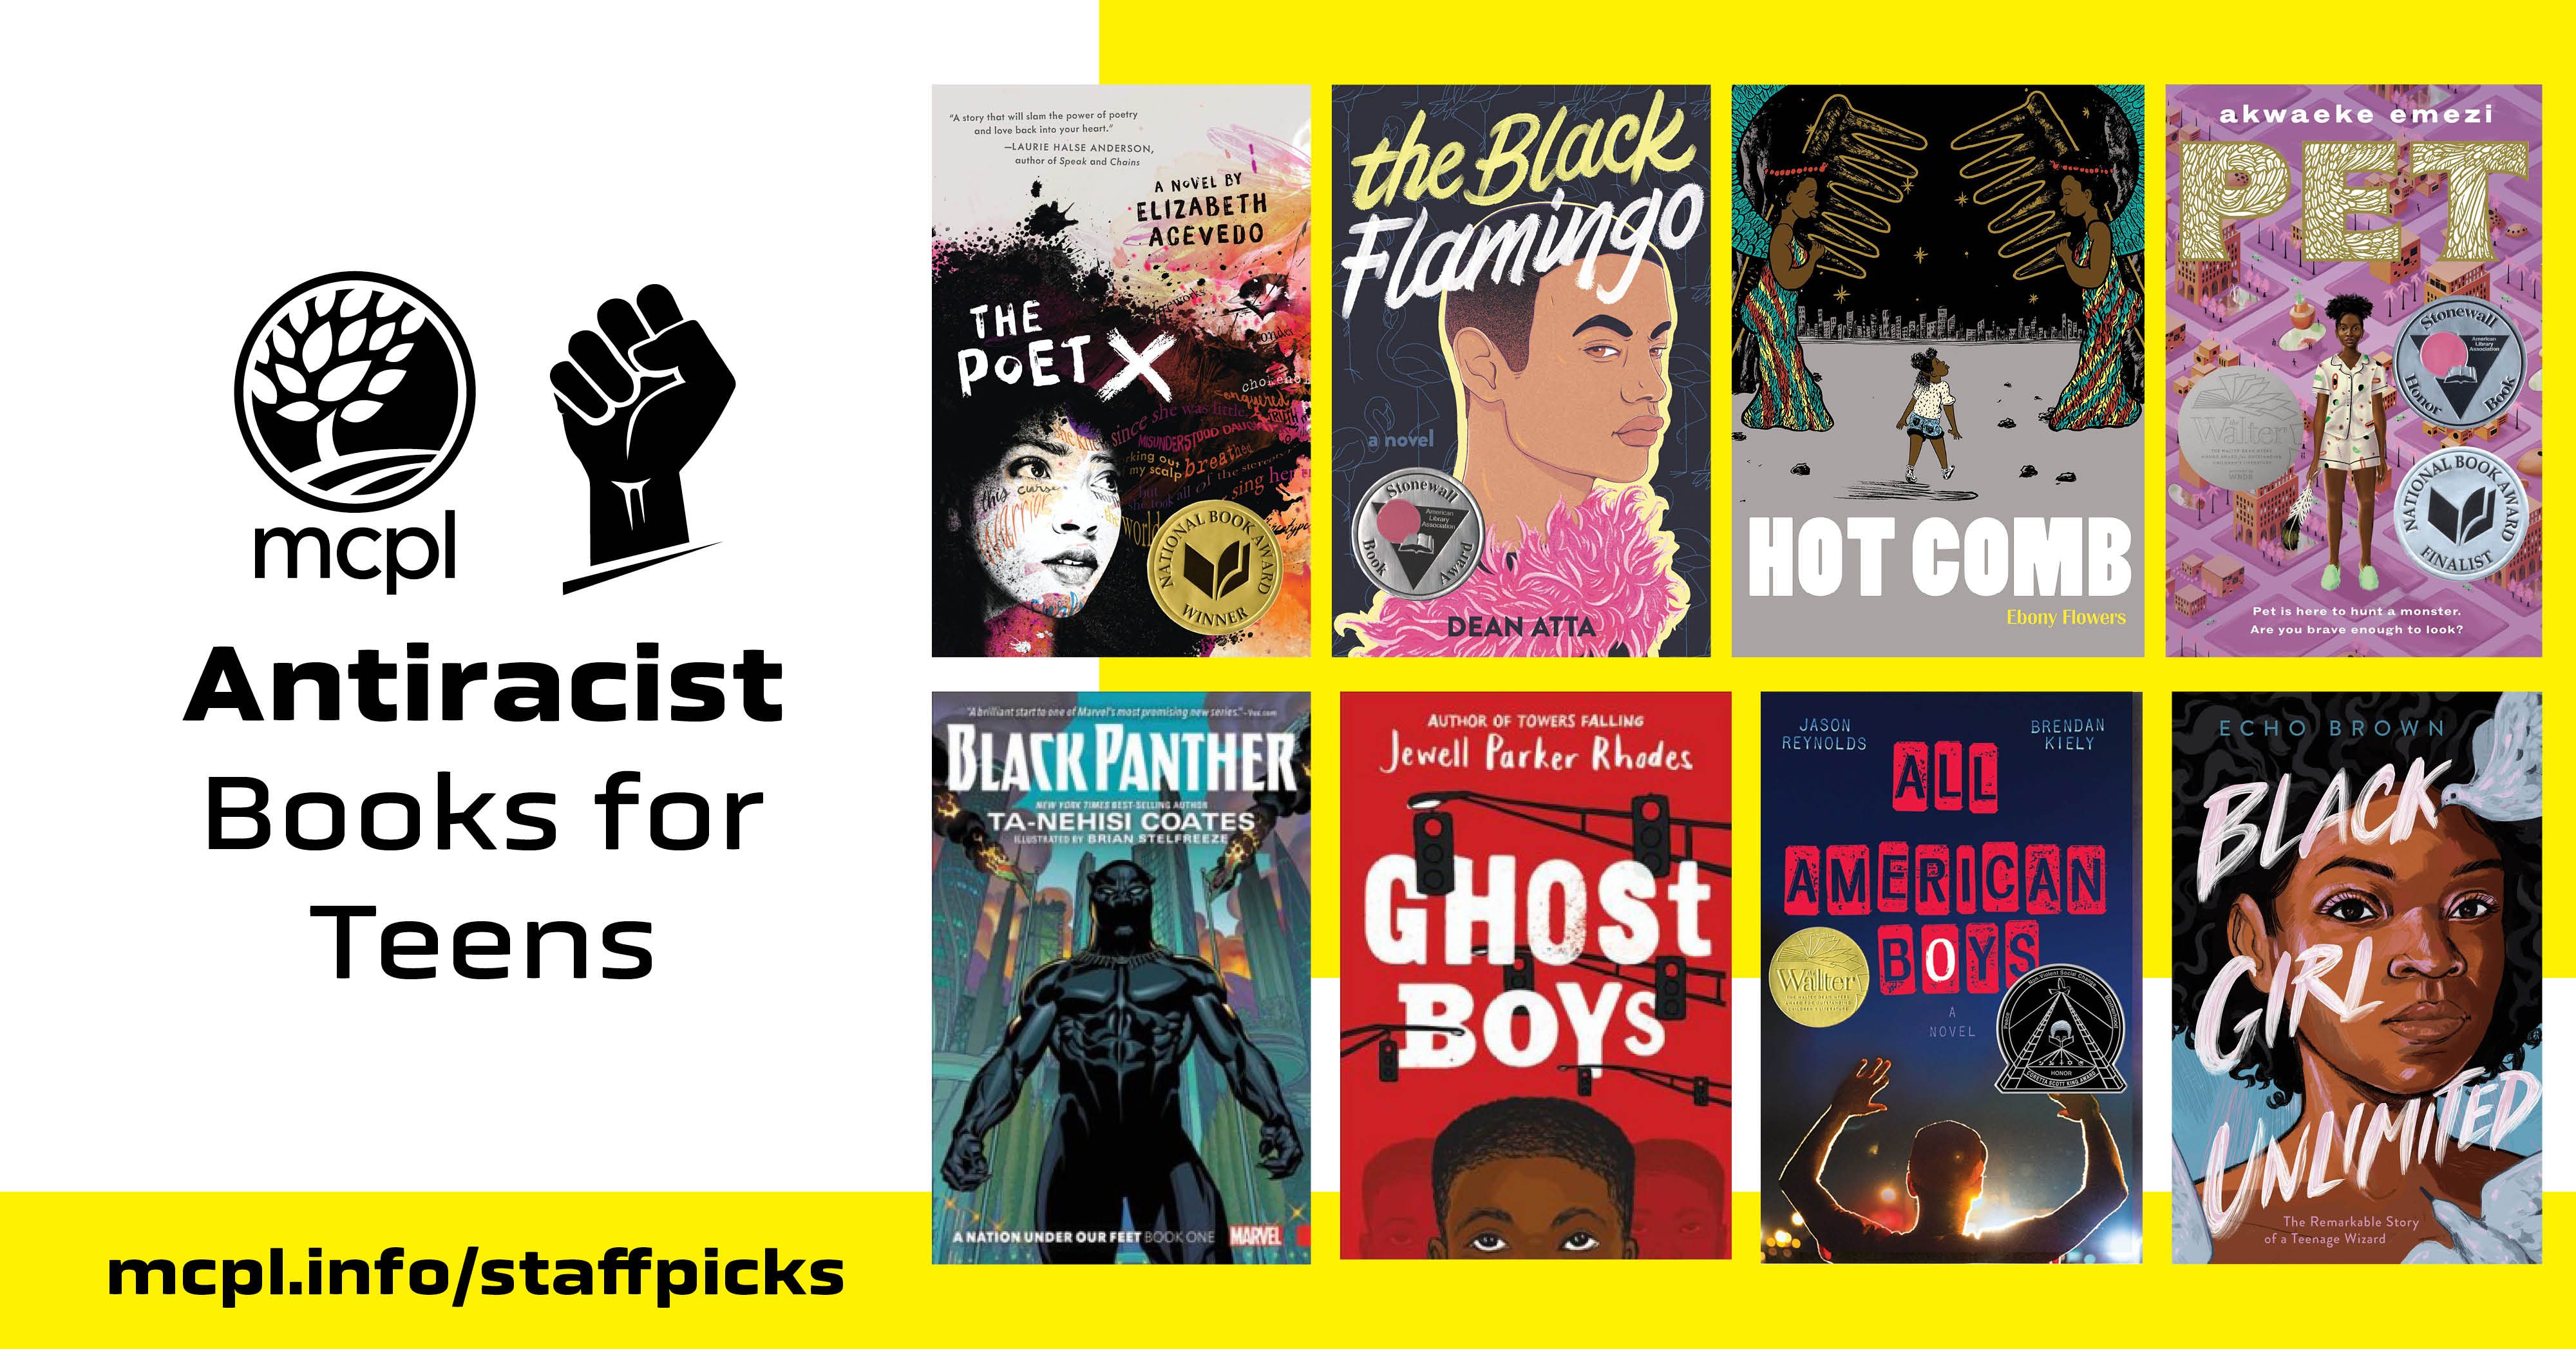 Antiracist Books for Teens